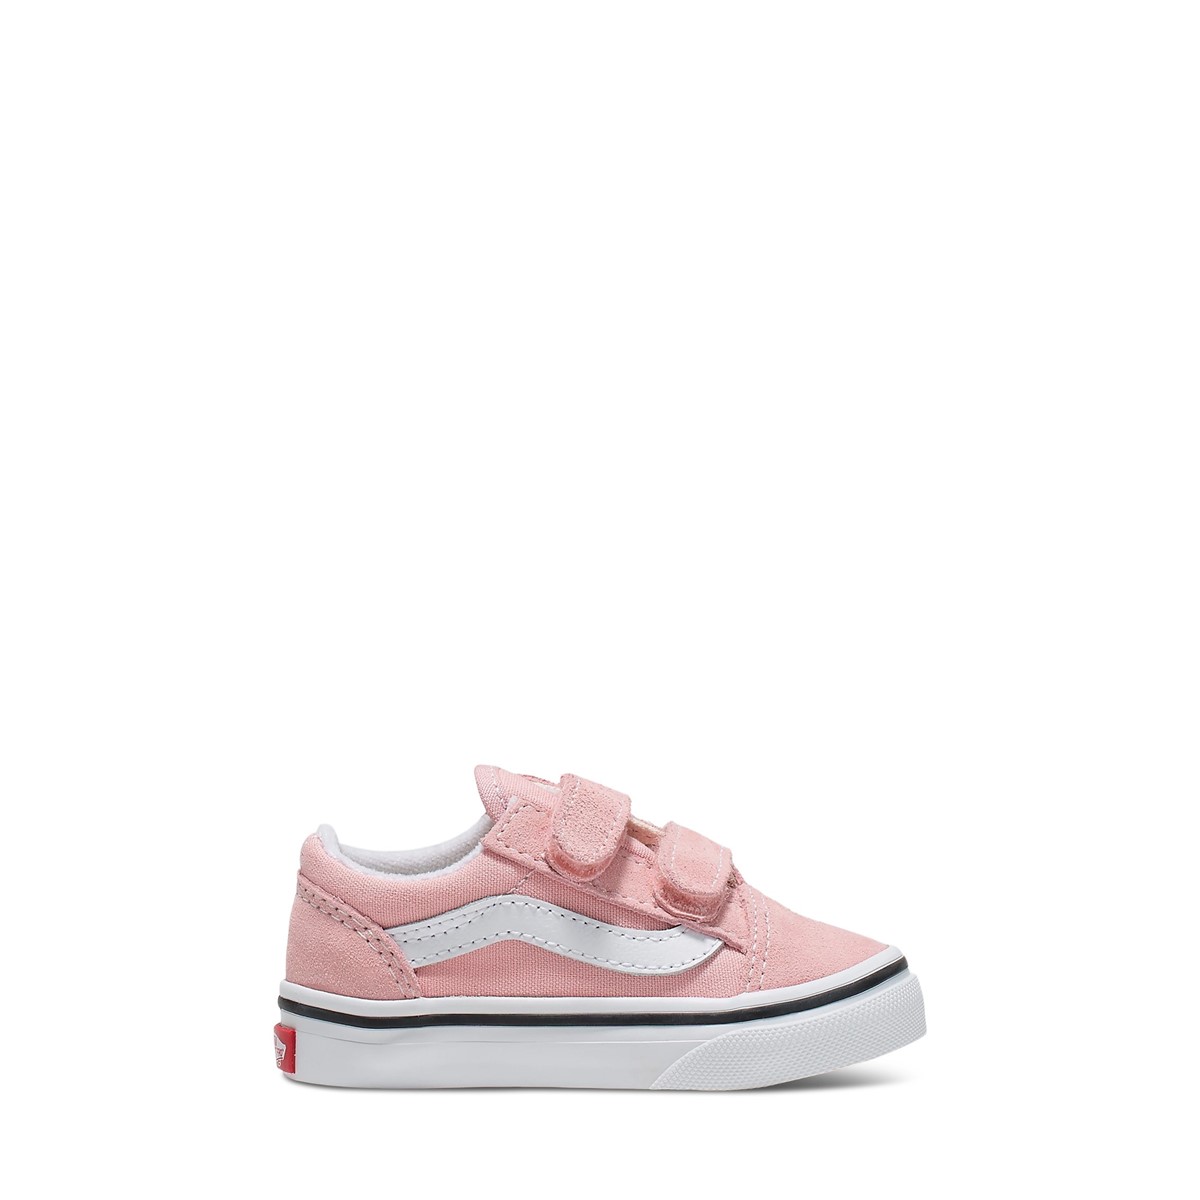 Baskets Old Skool V roses et blanches pour tout-petits